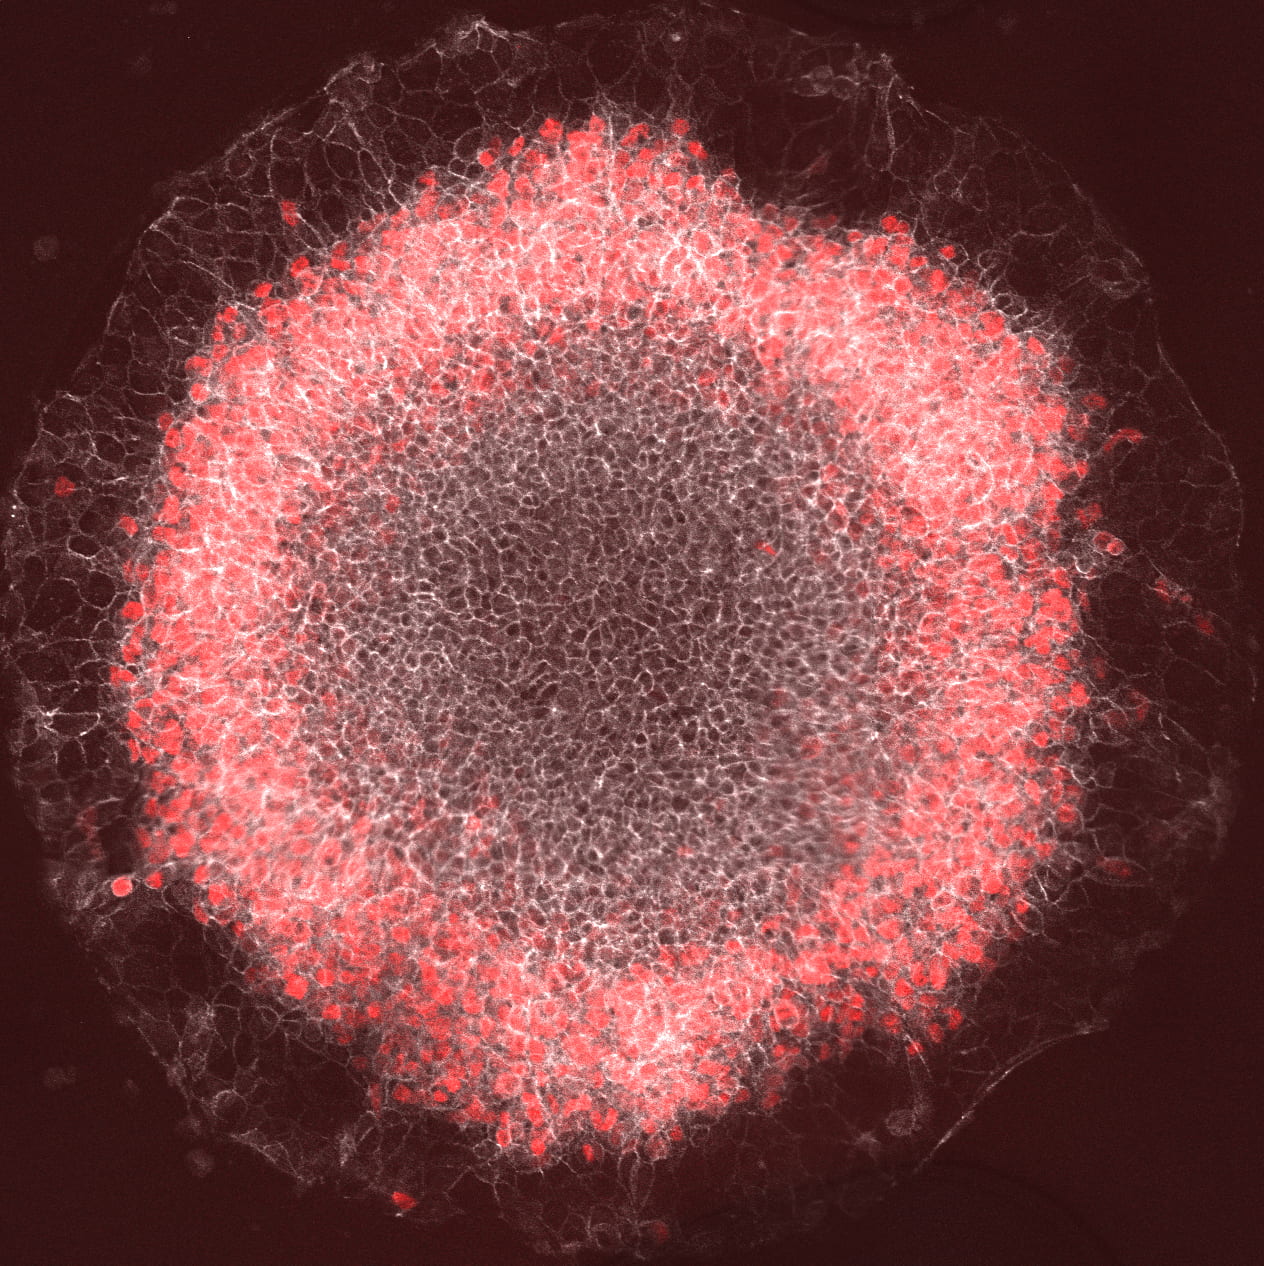 A lighter red ring of cells circles a darker red set of cells at the center of the ball-like stem cell colony